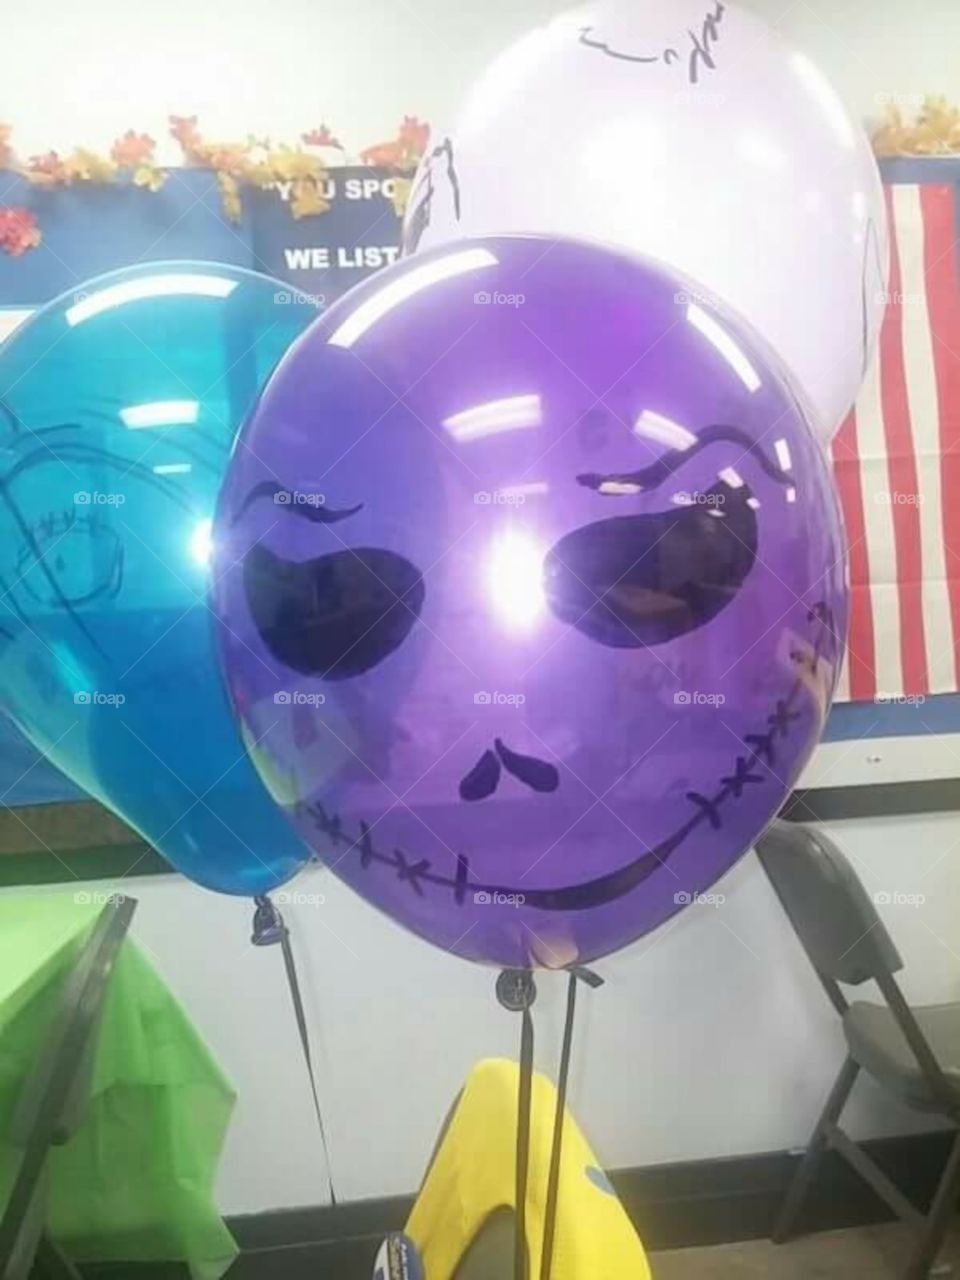 When I worked at Wal-Mart we'd get a balloon for ever credit card we got someone to sign up for. I drew Jack on one.